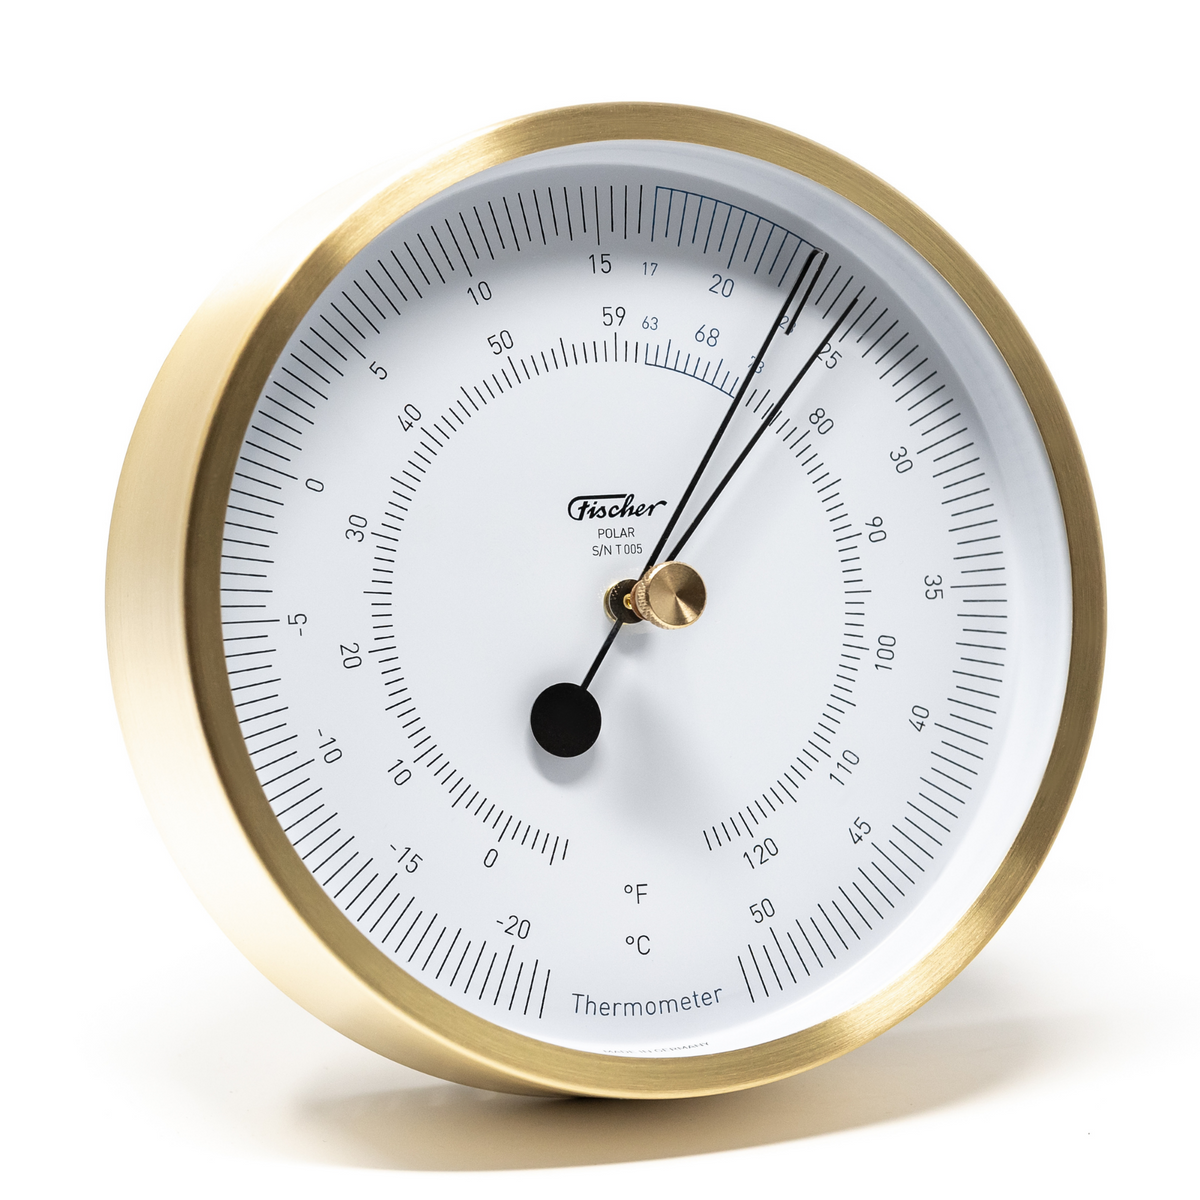 POLAR Instruments - Thermometer Brushed Brass